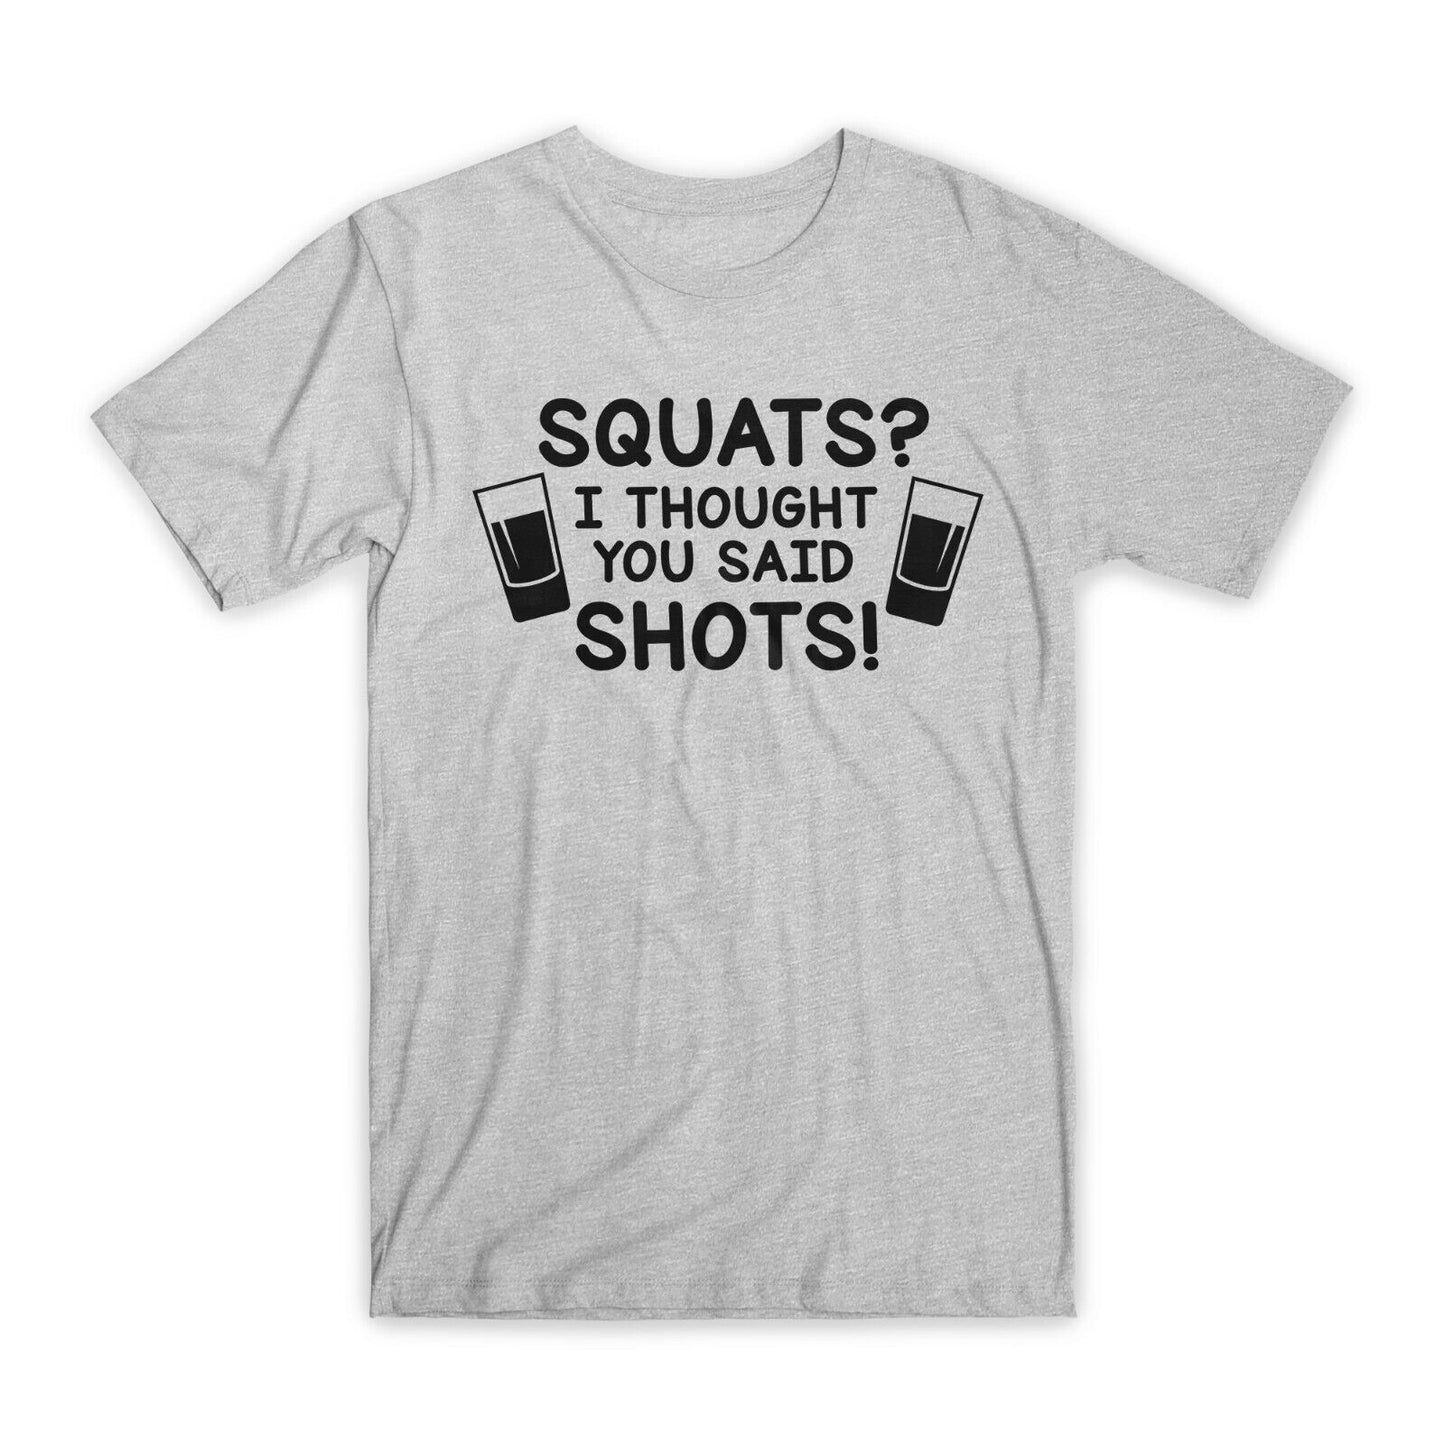 Squats I Thought You Said Shots T-Shirt Premium Soft Cotton Funny Tees Gift NEW